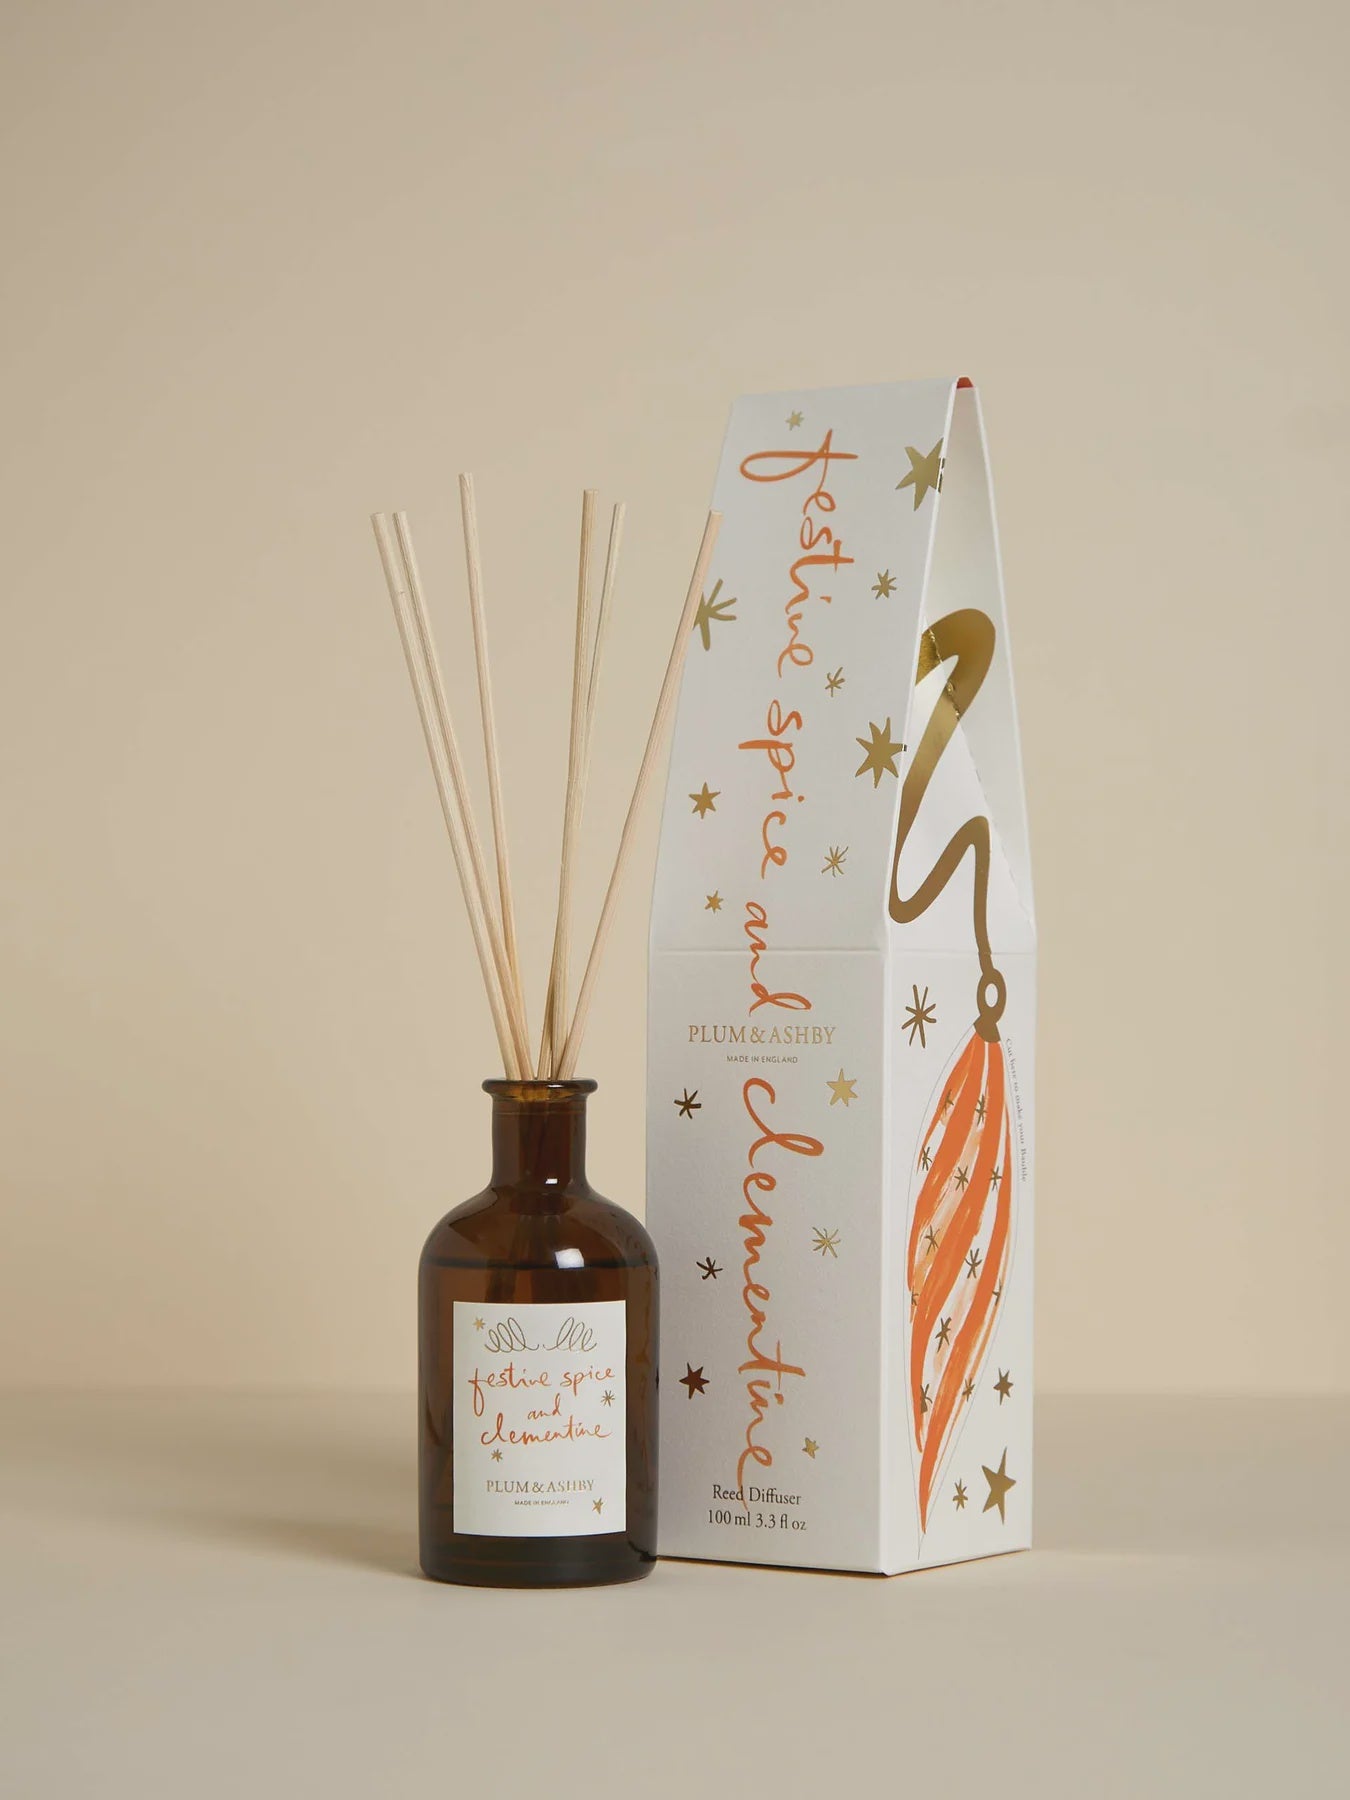 Festive Spice and Clementine Diffuser